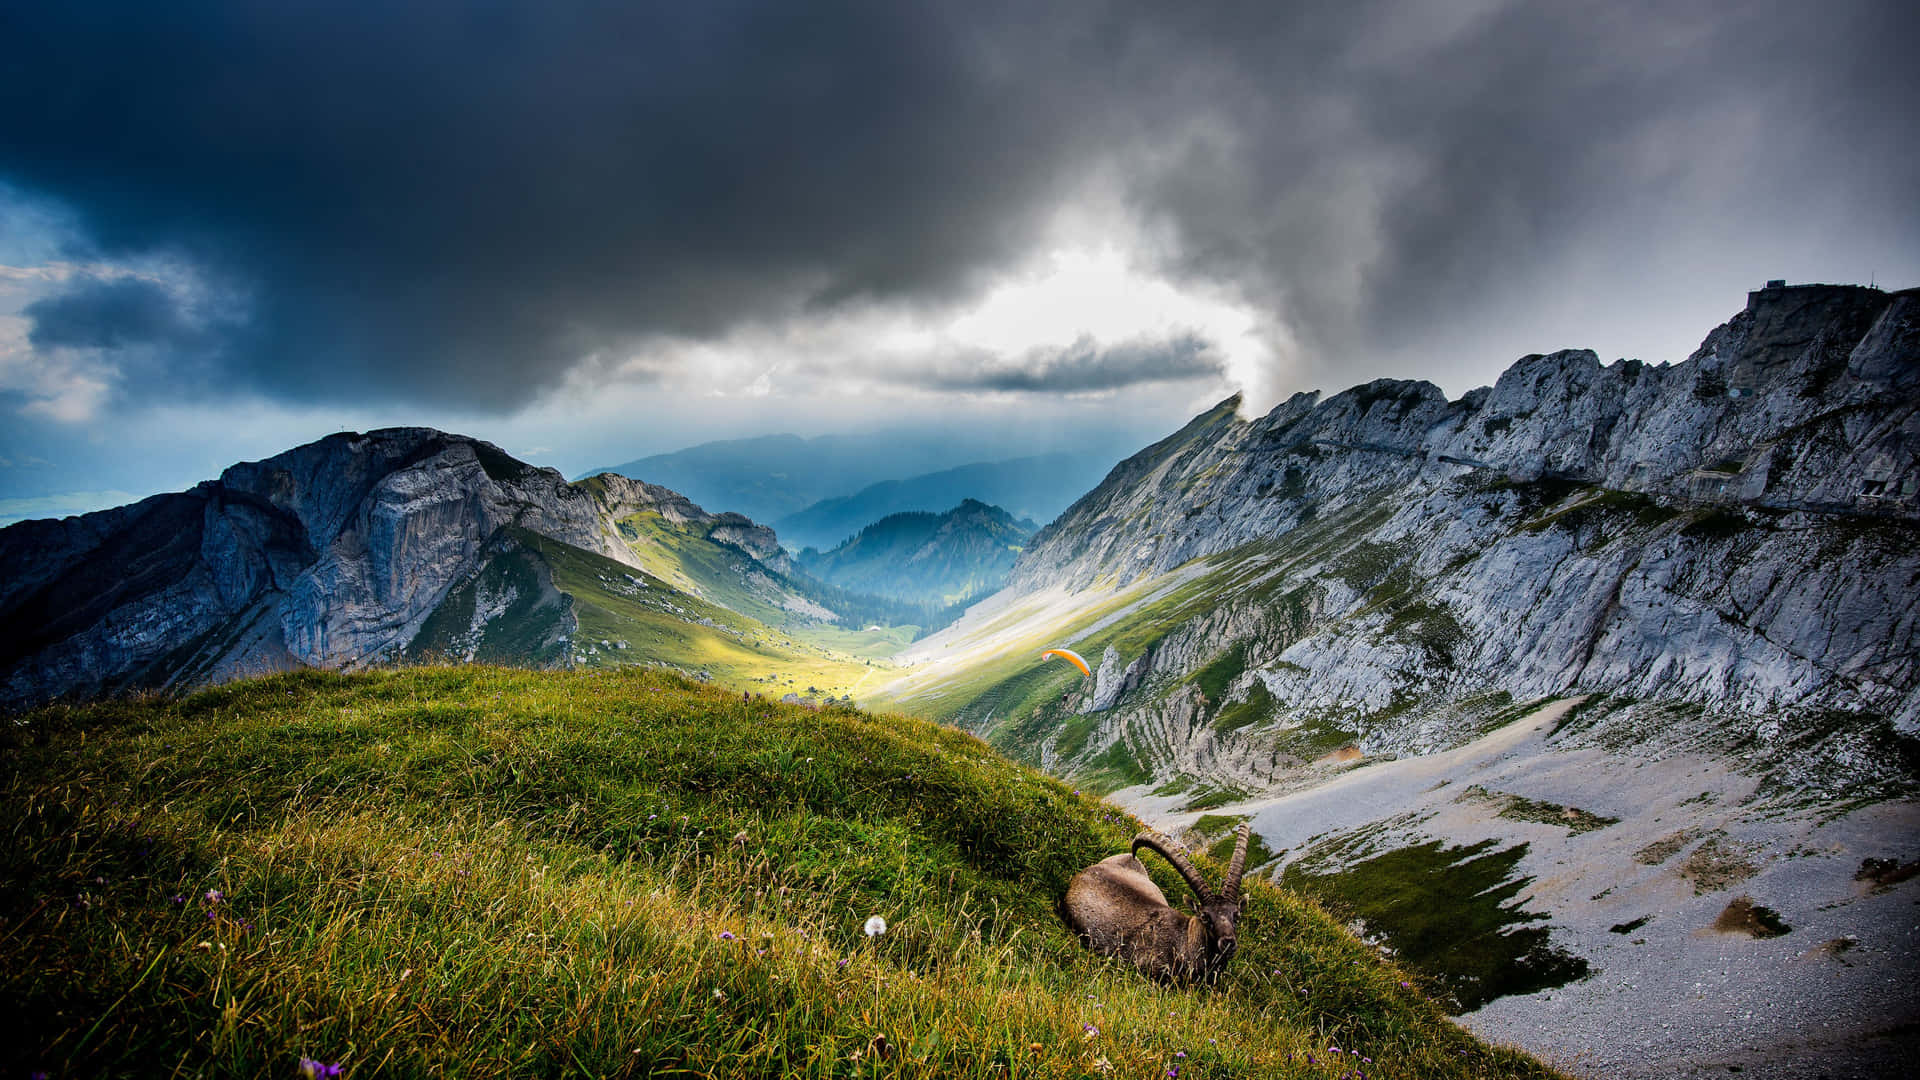 A Deer Is Grazing In The Mountains Under A Stormy Sky